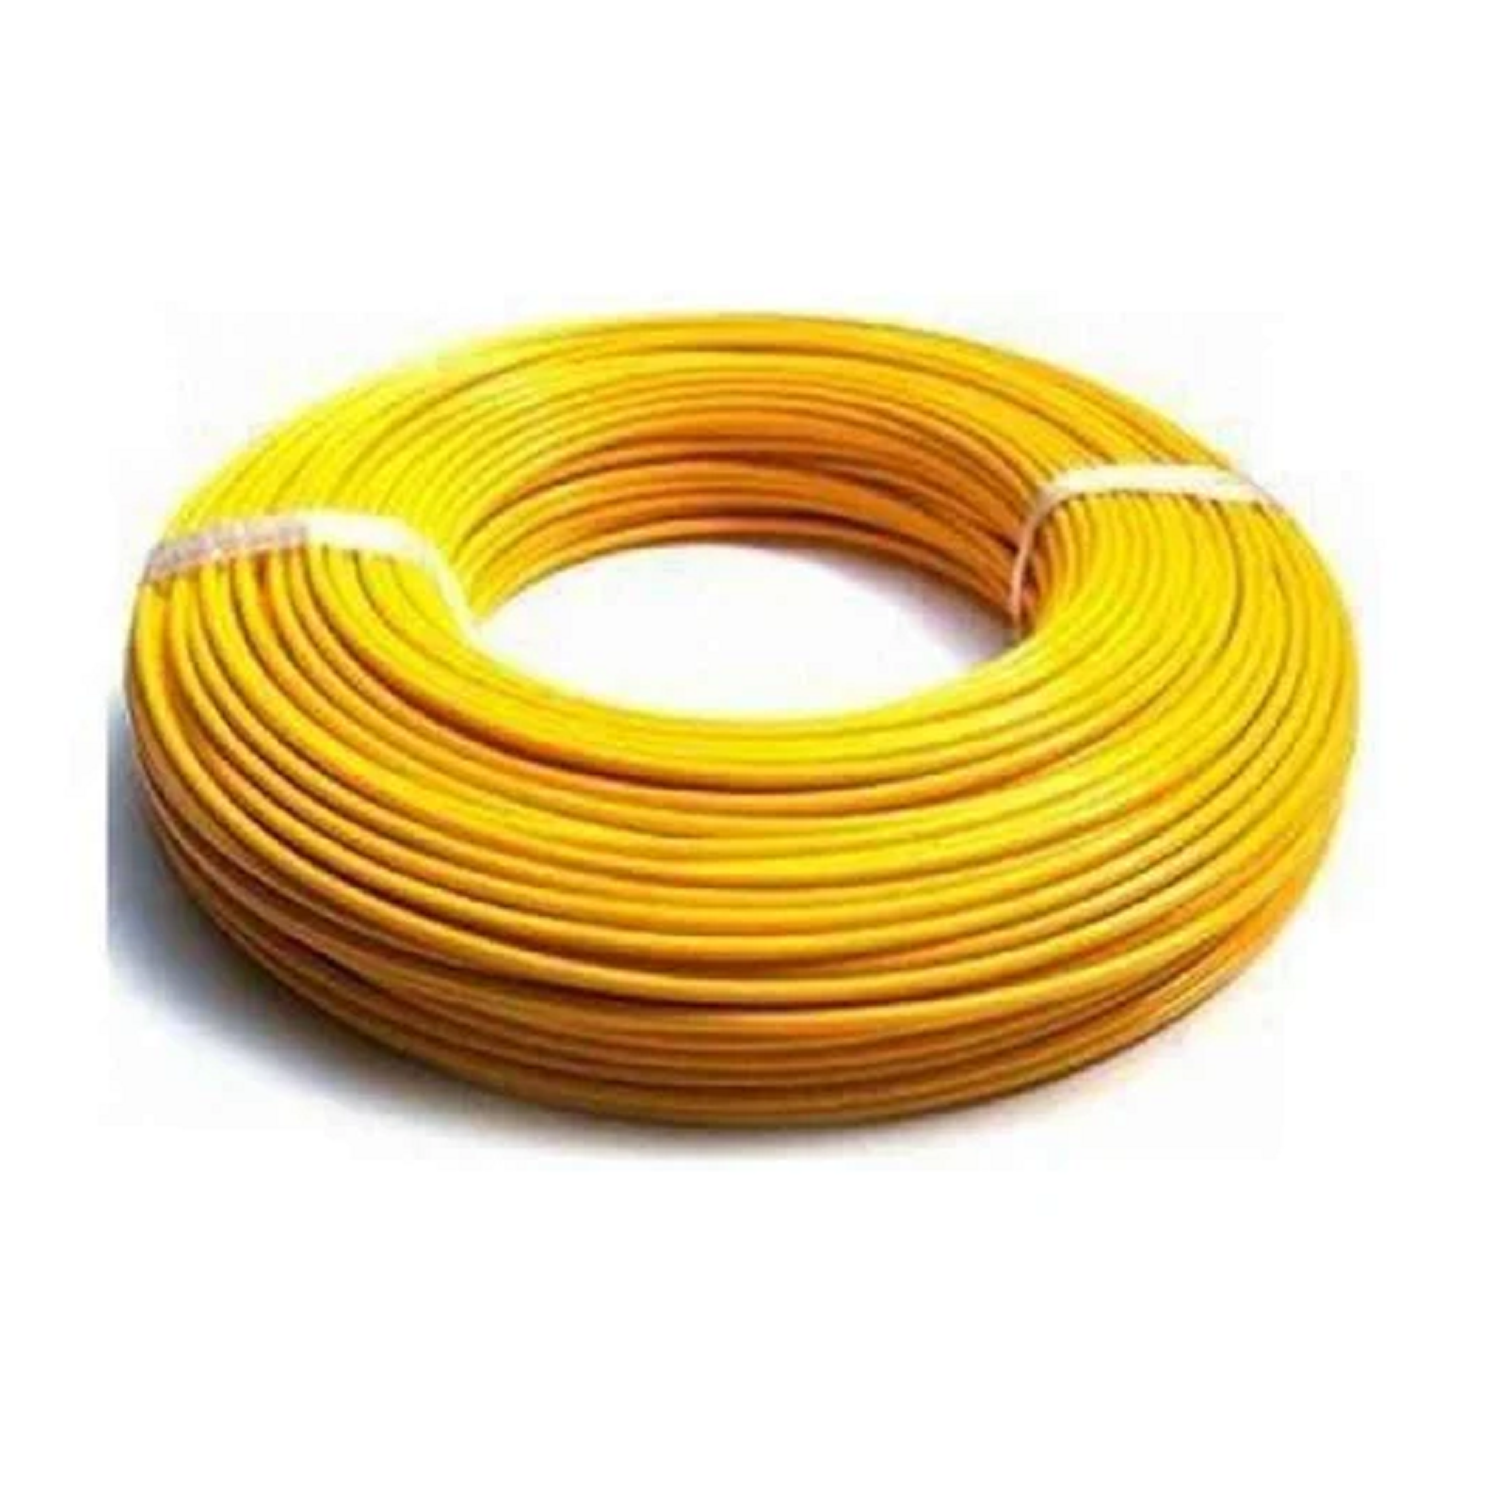 1.0 Sqmm RR FR Single Core Copper Wire (180 Mtr) With PVC Insulated for Domestic 38 Industrial Uses 